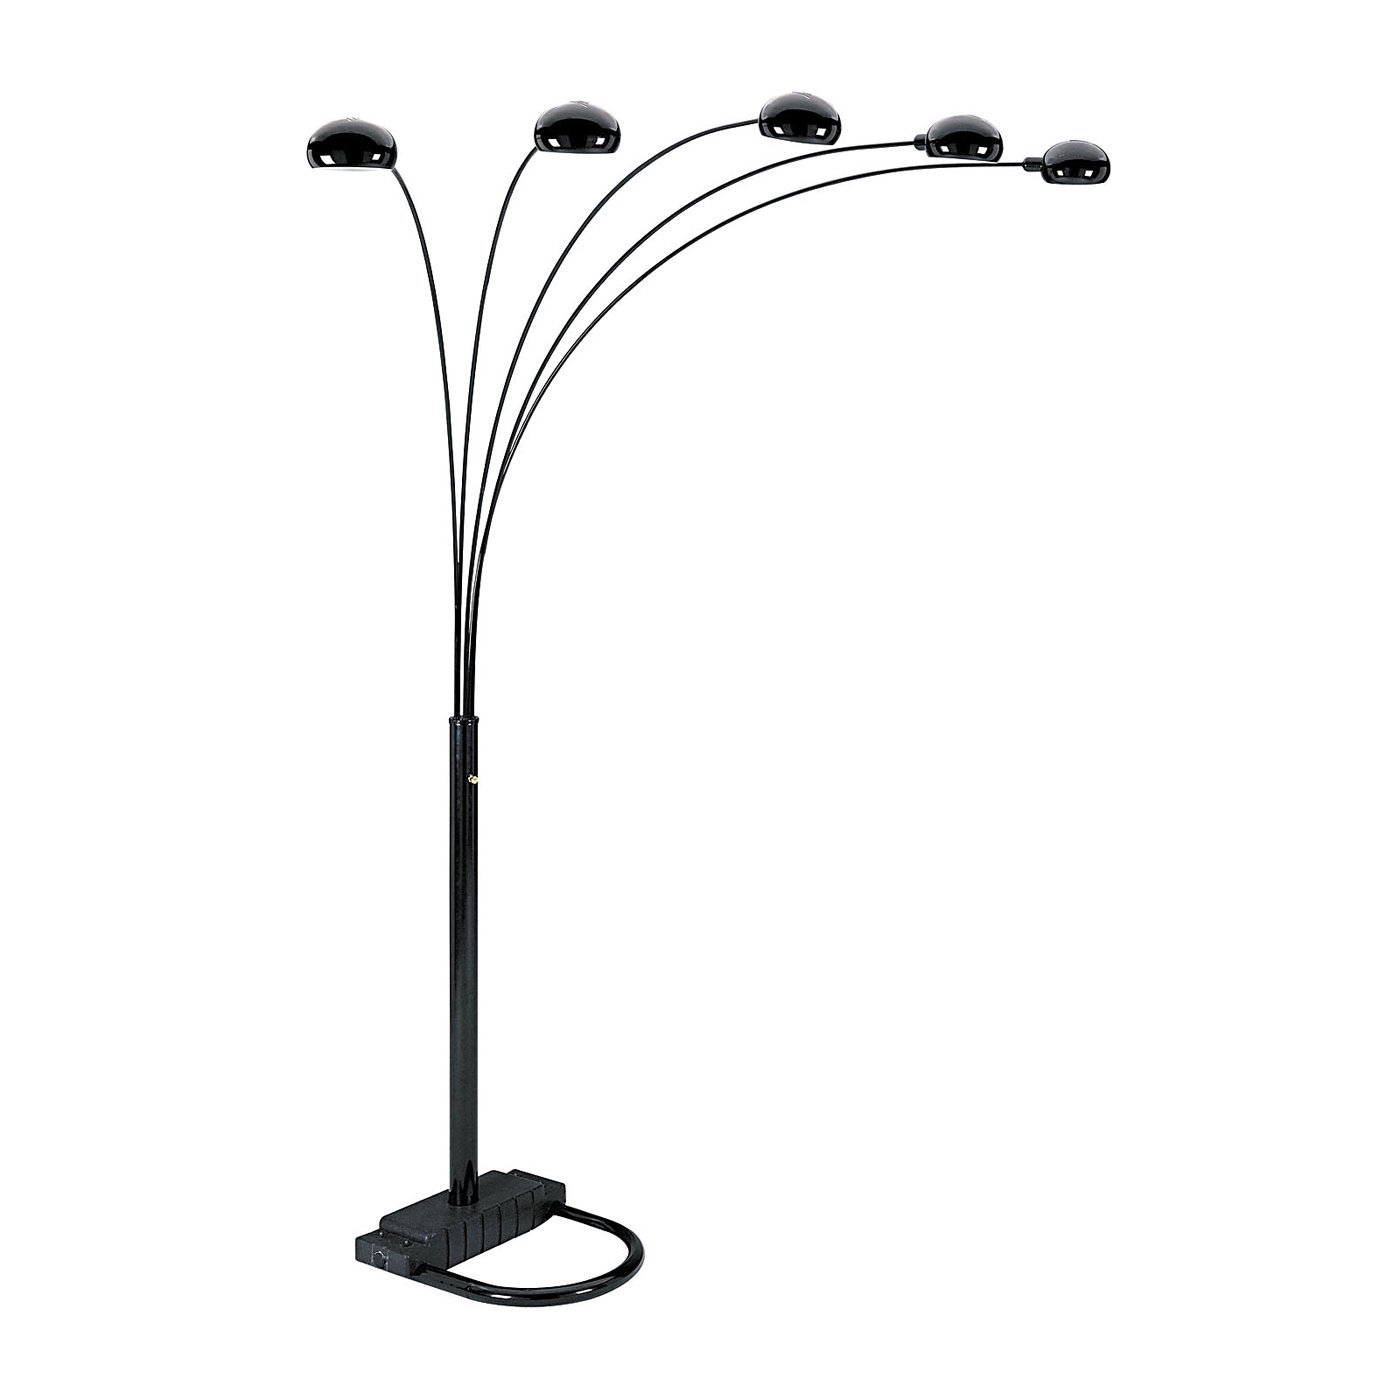 Ore International 5 Arms Arch Floor Lamp Black Walmart pertaining to dimensions 1400 X 1400